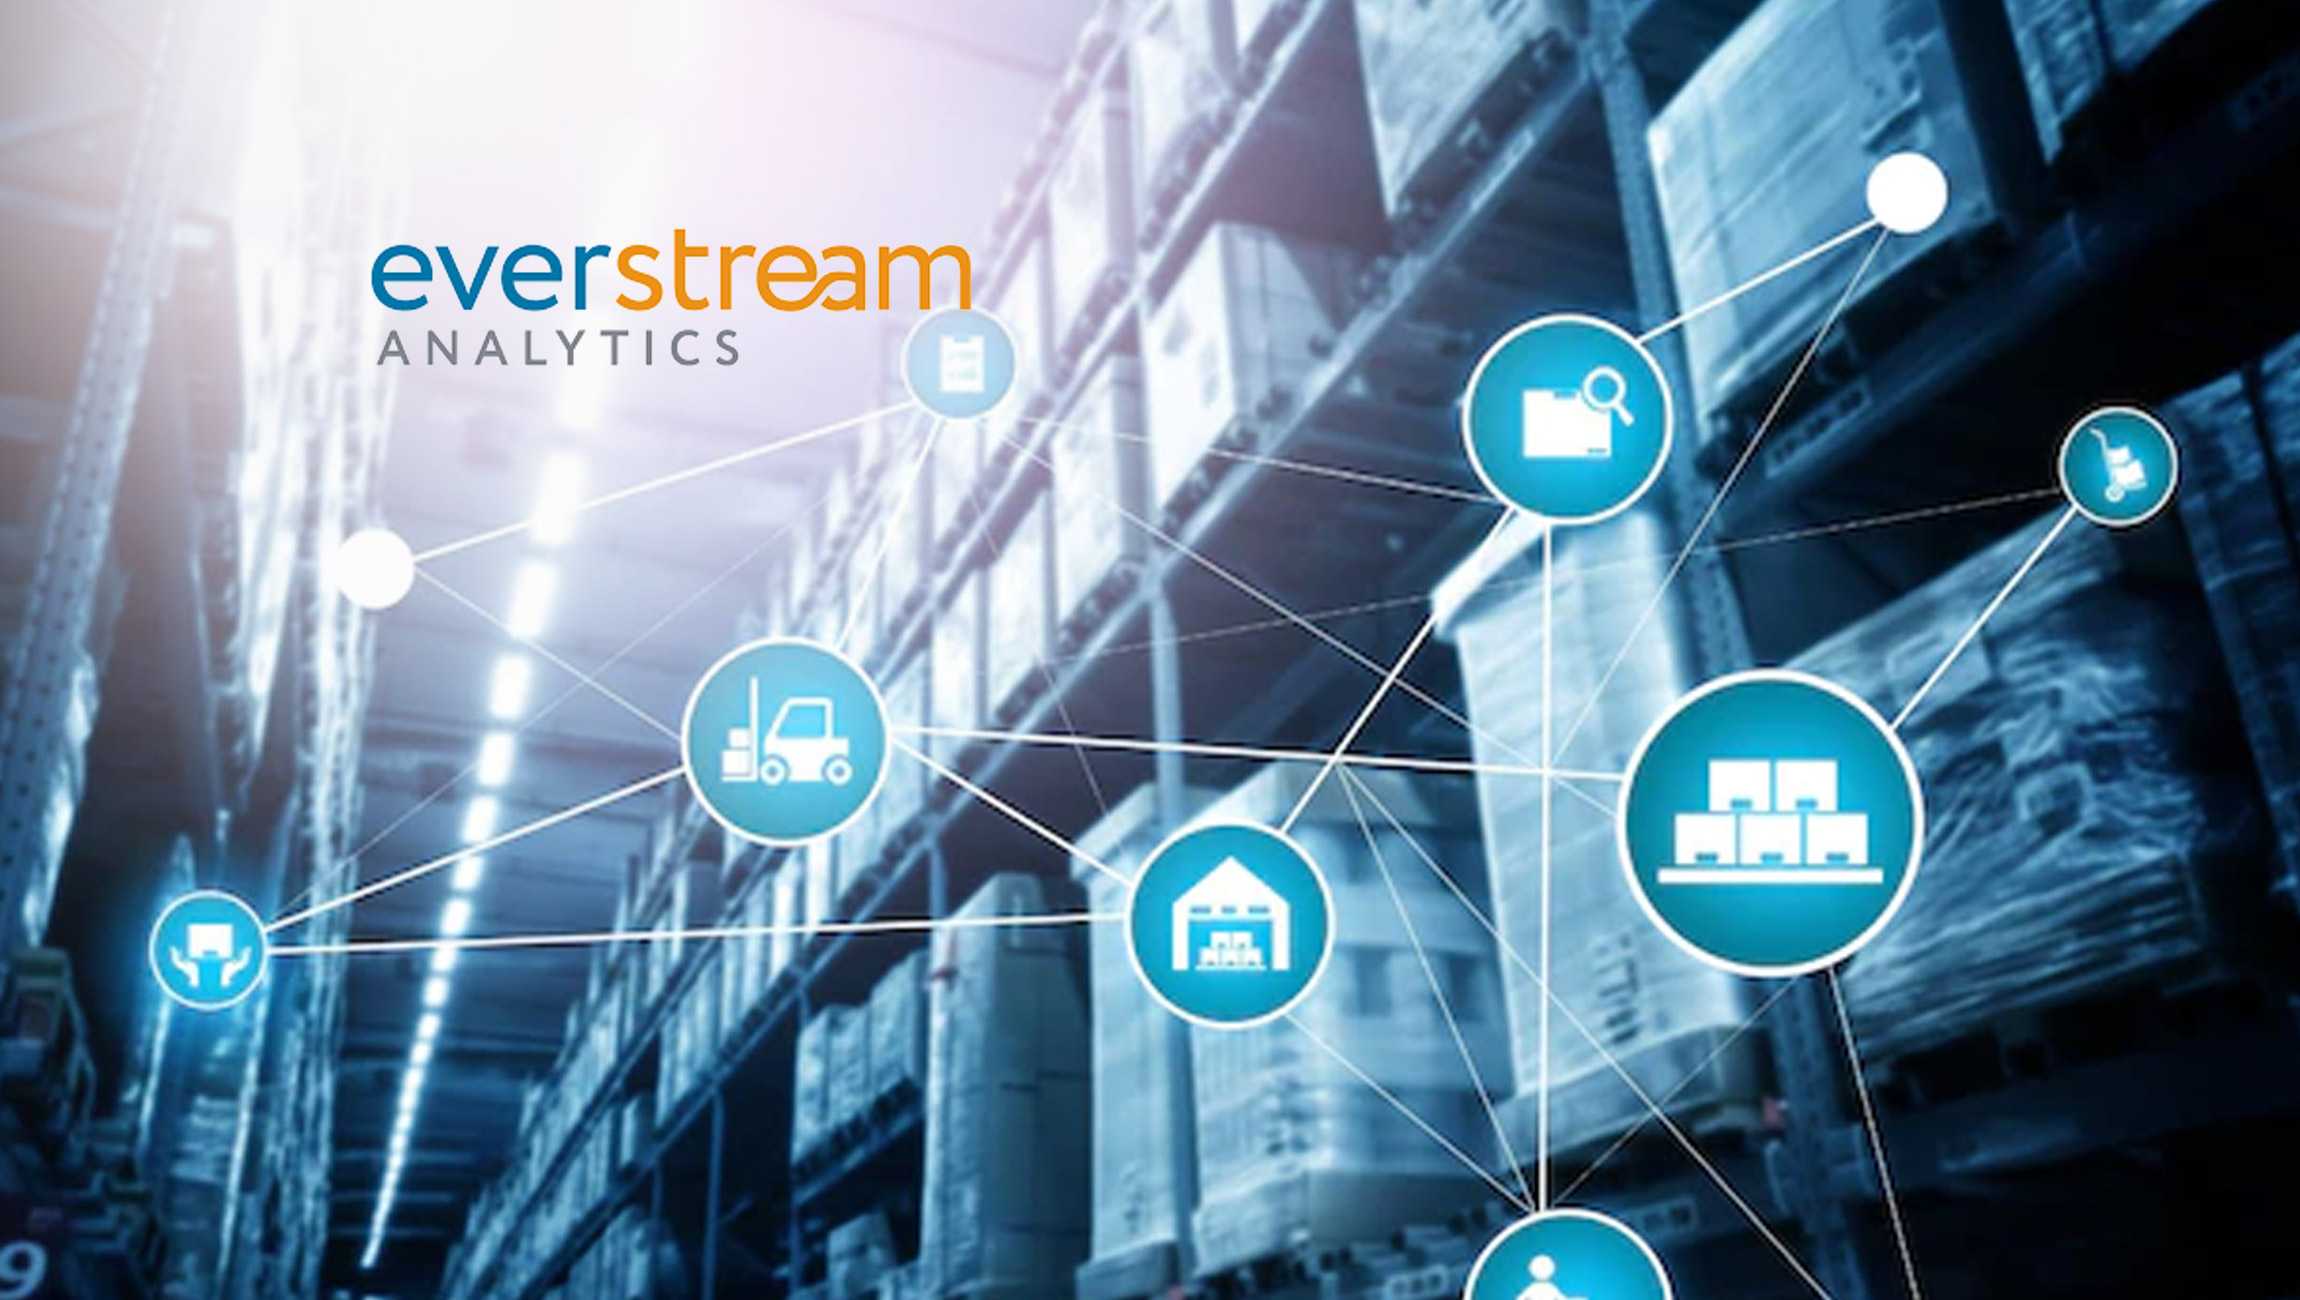 Everstream Analytics CEO Recognized as Top Women in Supply Chain for Outstanding Leadership and Mentorship